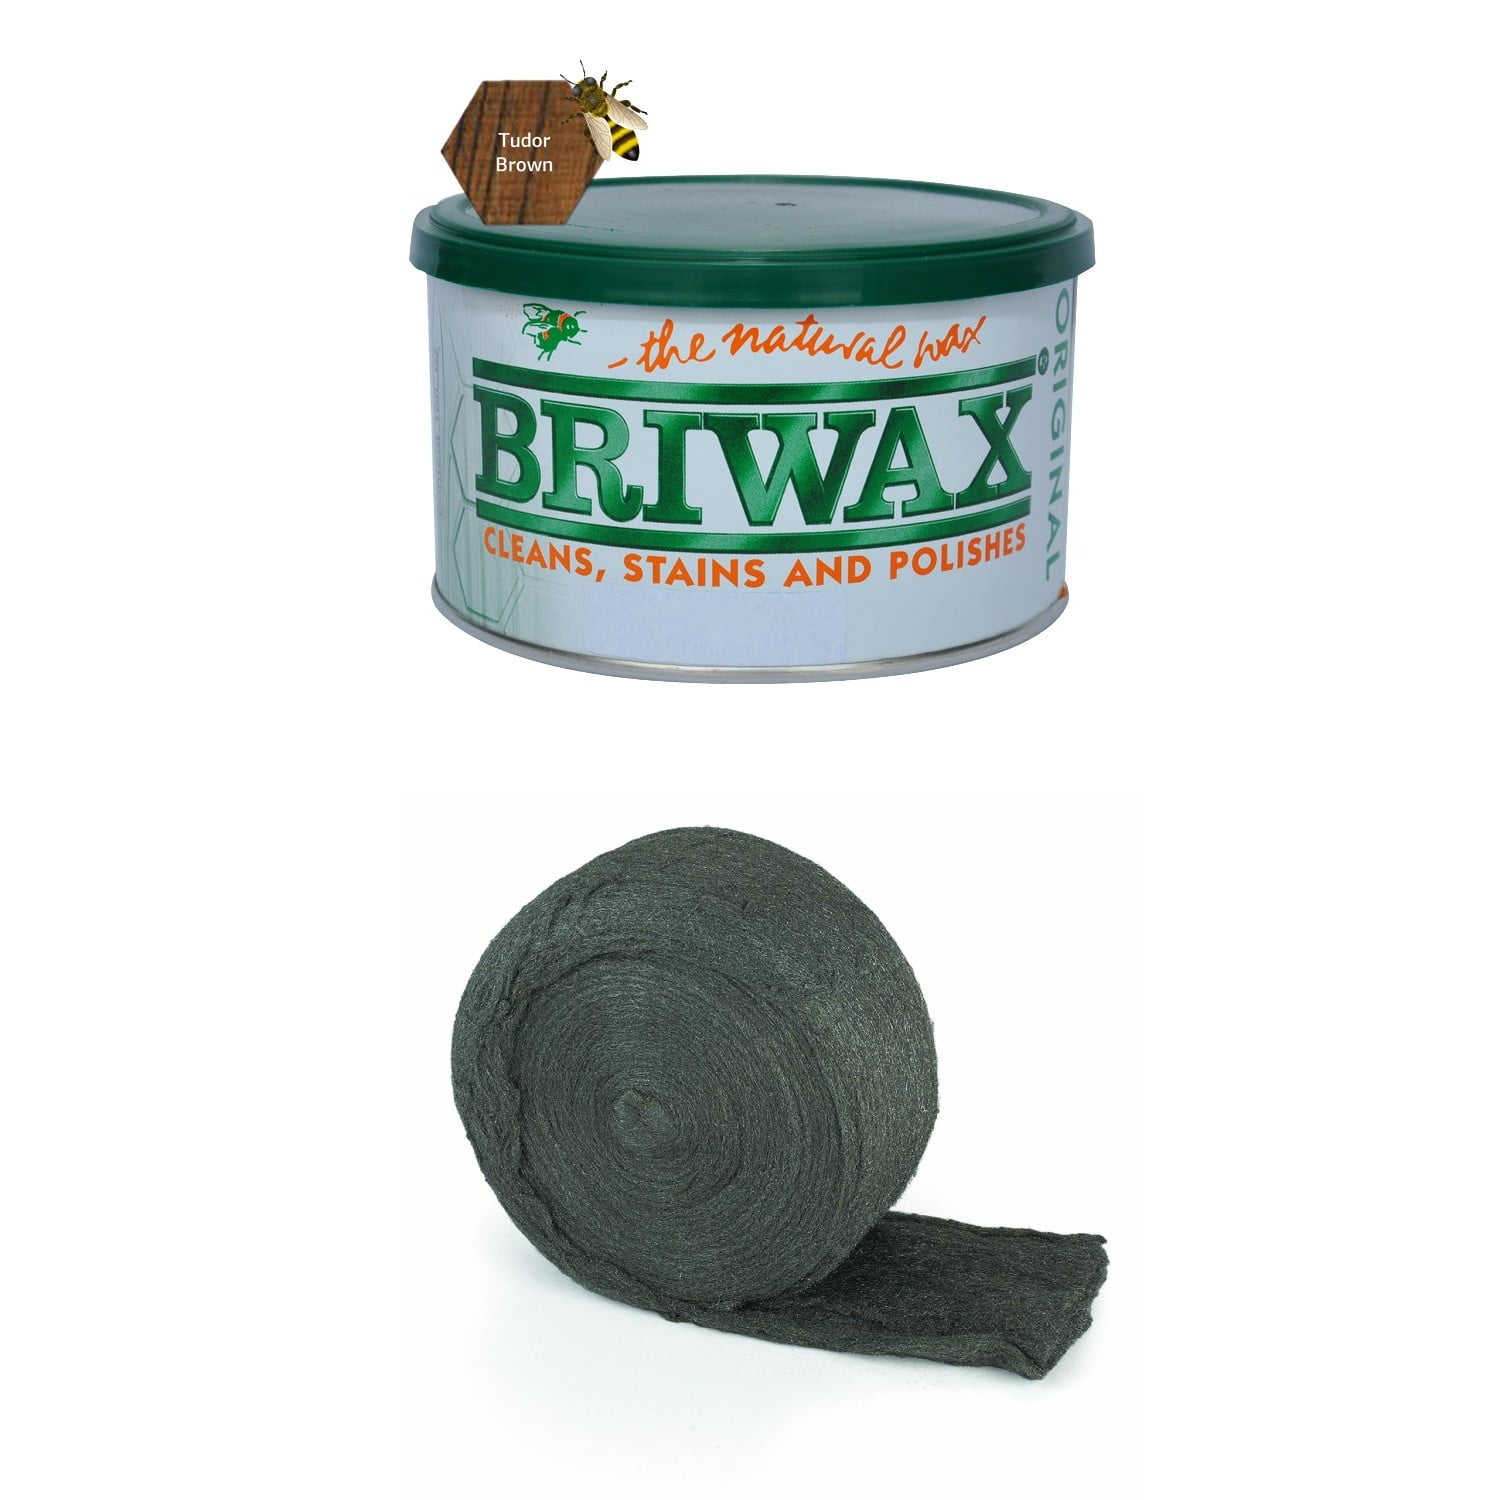  Customer reviews: Briwax (Tudor Brown) Furniture Wax Polish,  Cleans, stains, and polishes